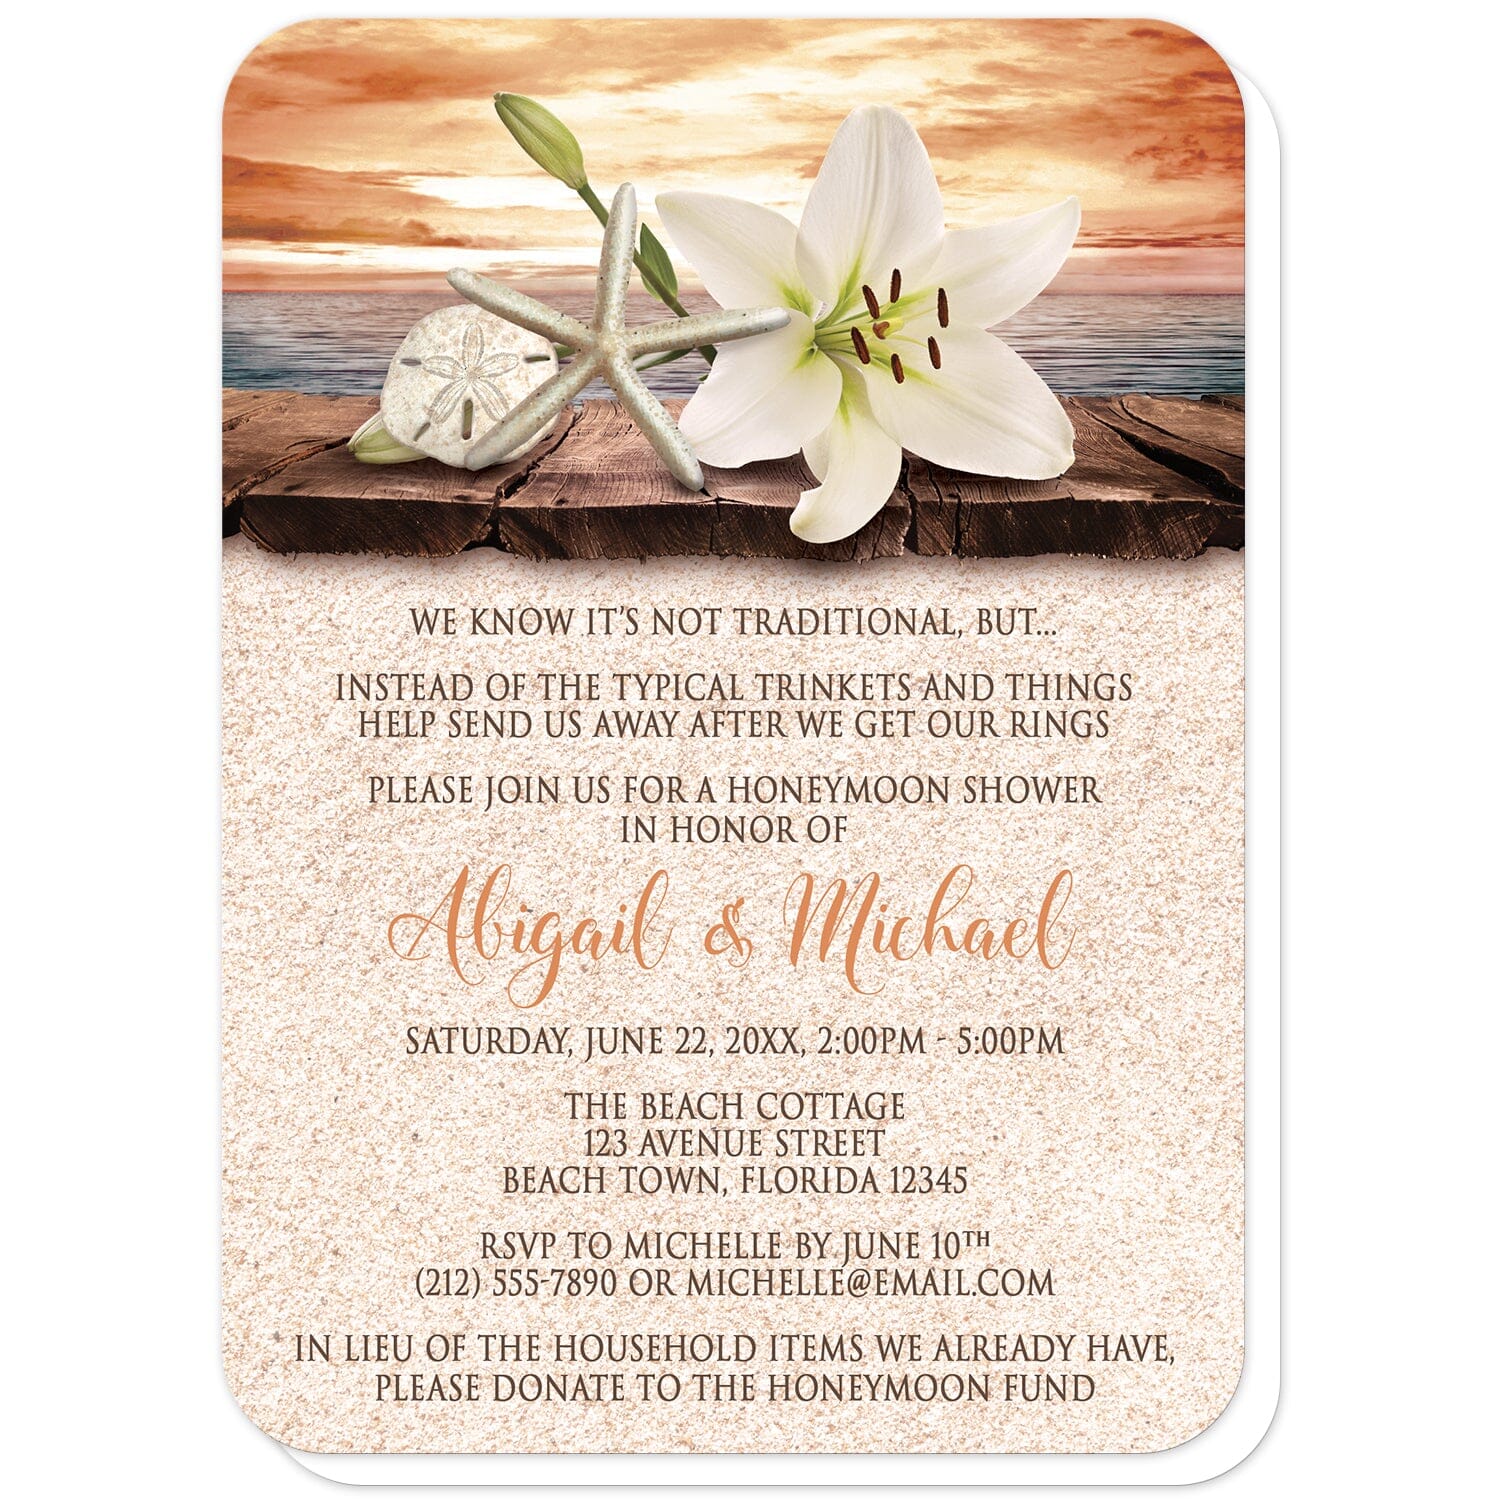 Lily Seashells and Sand Autumn Beach Honeymoon Shower Invitations (with rounded corners) at Artistically Invited. Lily seashells and sand autumn beach honeymoon shower invitations with an elegant white lily, a starfish, and a sand dollar on a rustic wood dock overlooking the open water under an orange sunset sky. Your personalized honeymoon shower celebration details are custom printed in dark brown and orange over a beige sand background design.